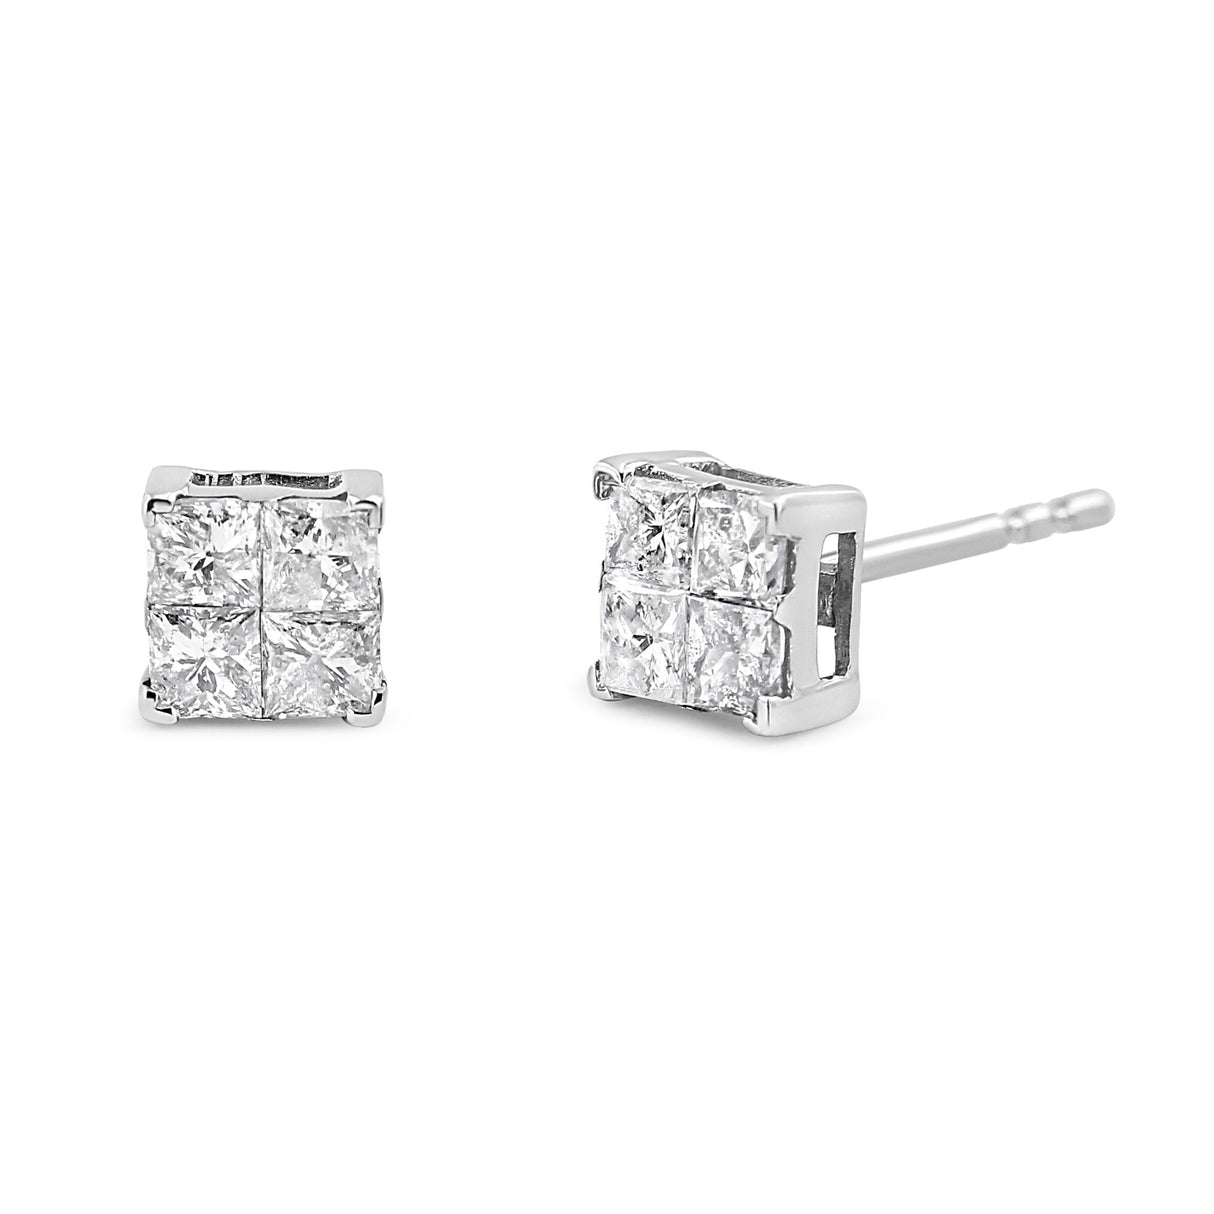 10K White Gold 1.00 Cttw Invisible Set Princess-Cut Diamond Composite Square Shape Stud Earrings (G-H Color, I2-I3 Clarity) - Tuesday Morning-Stud Earrings